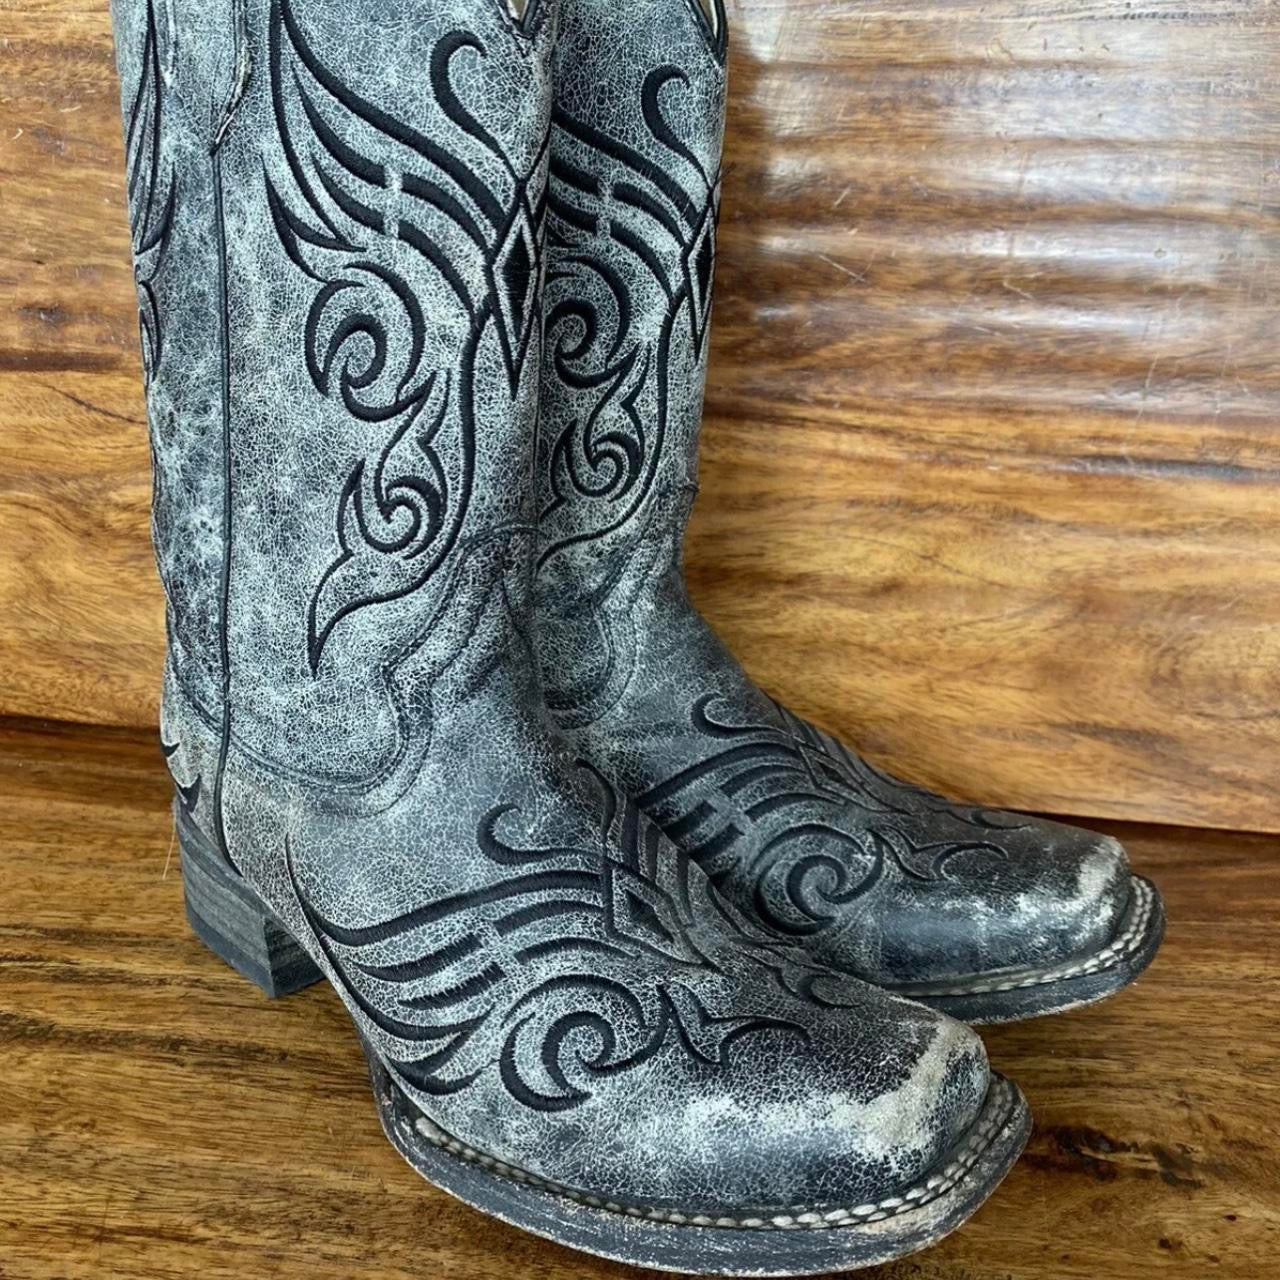 VINTAGE EMBROIDERED URBAN WESTERN BOOTS